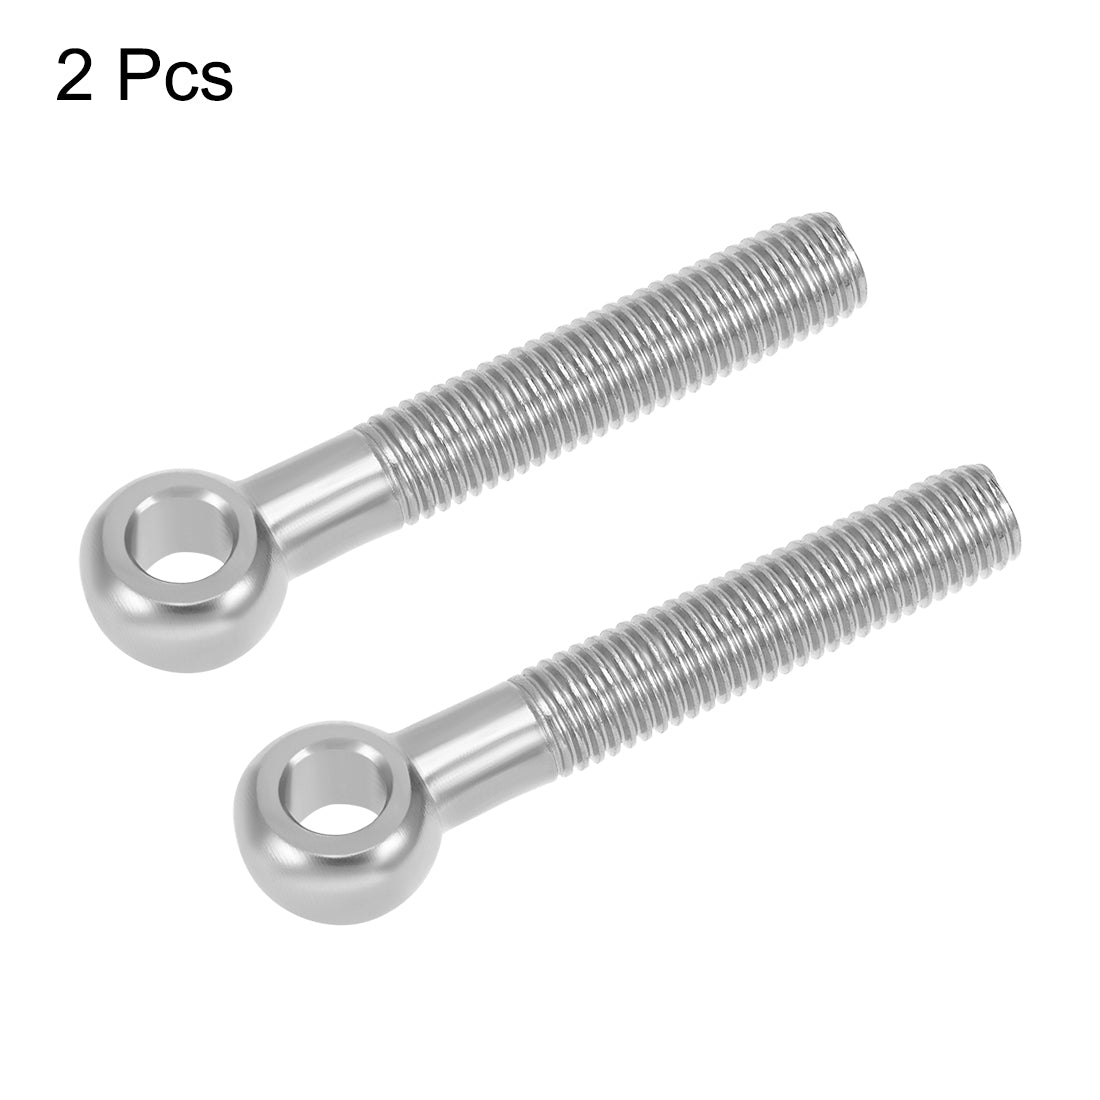 uxcell Uxcell M14 x 85mm Machinery Shoulder Swing Lifting Eye Bolt 304 Stainless Steel Metric Thread 2pcs